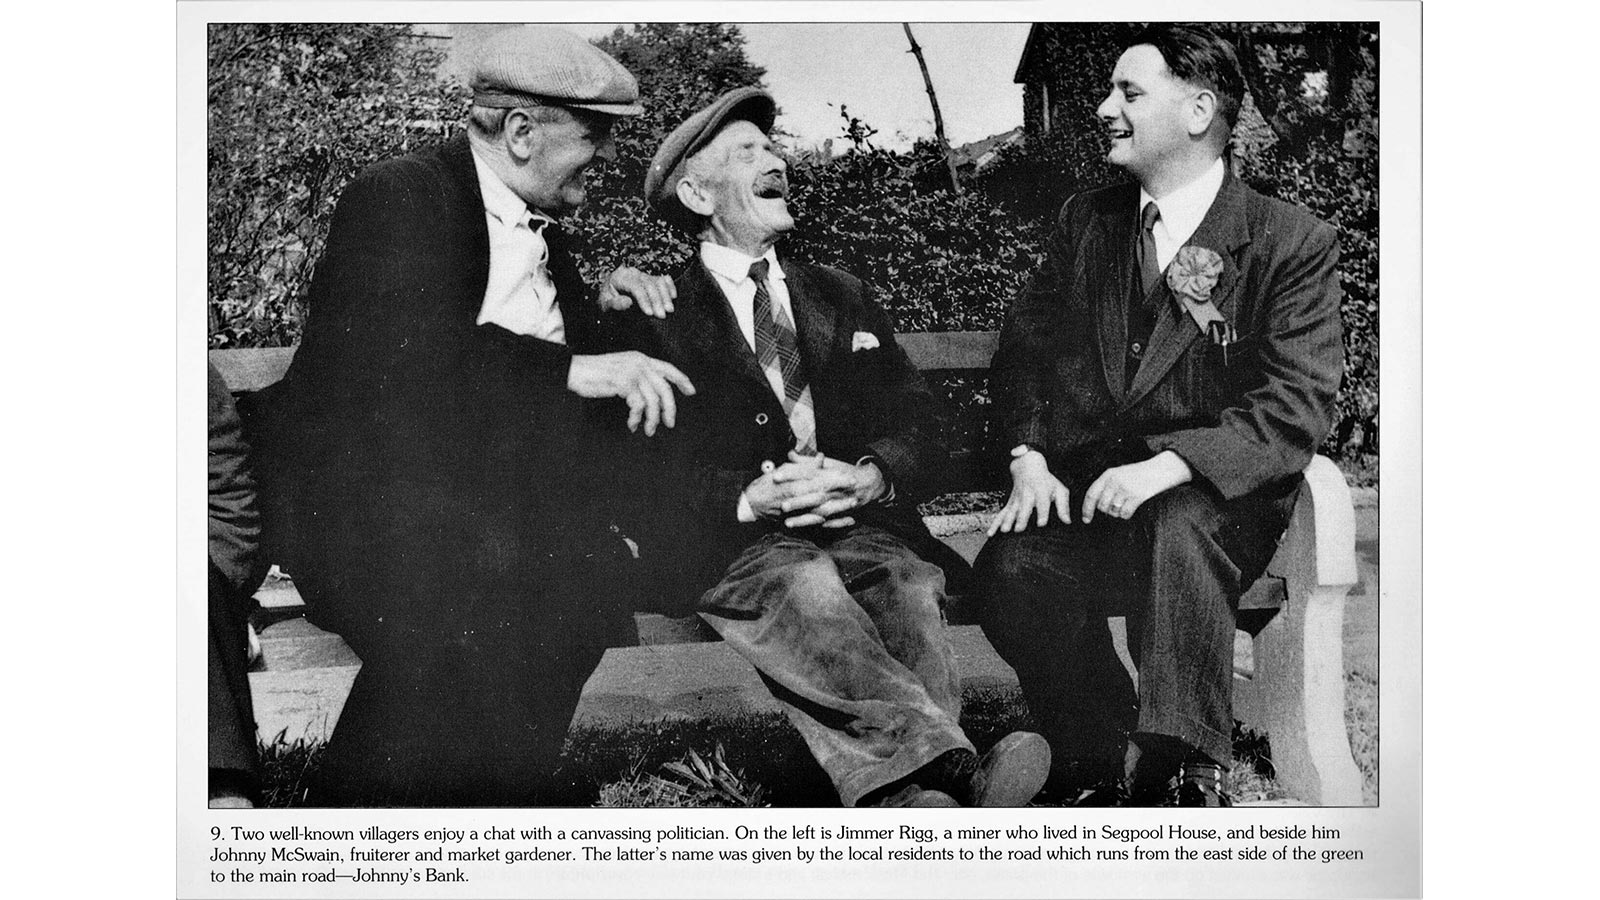 image of Jimmer Rigg and Johnny McSwain enjoying a chat with a canvassing politician in Walbottle Village - date unknown